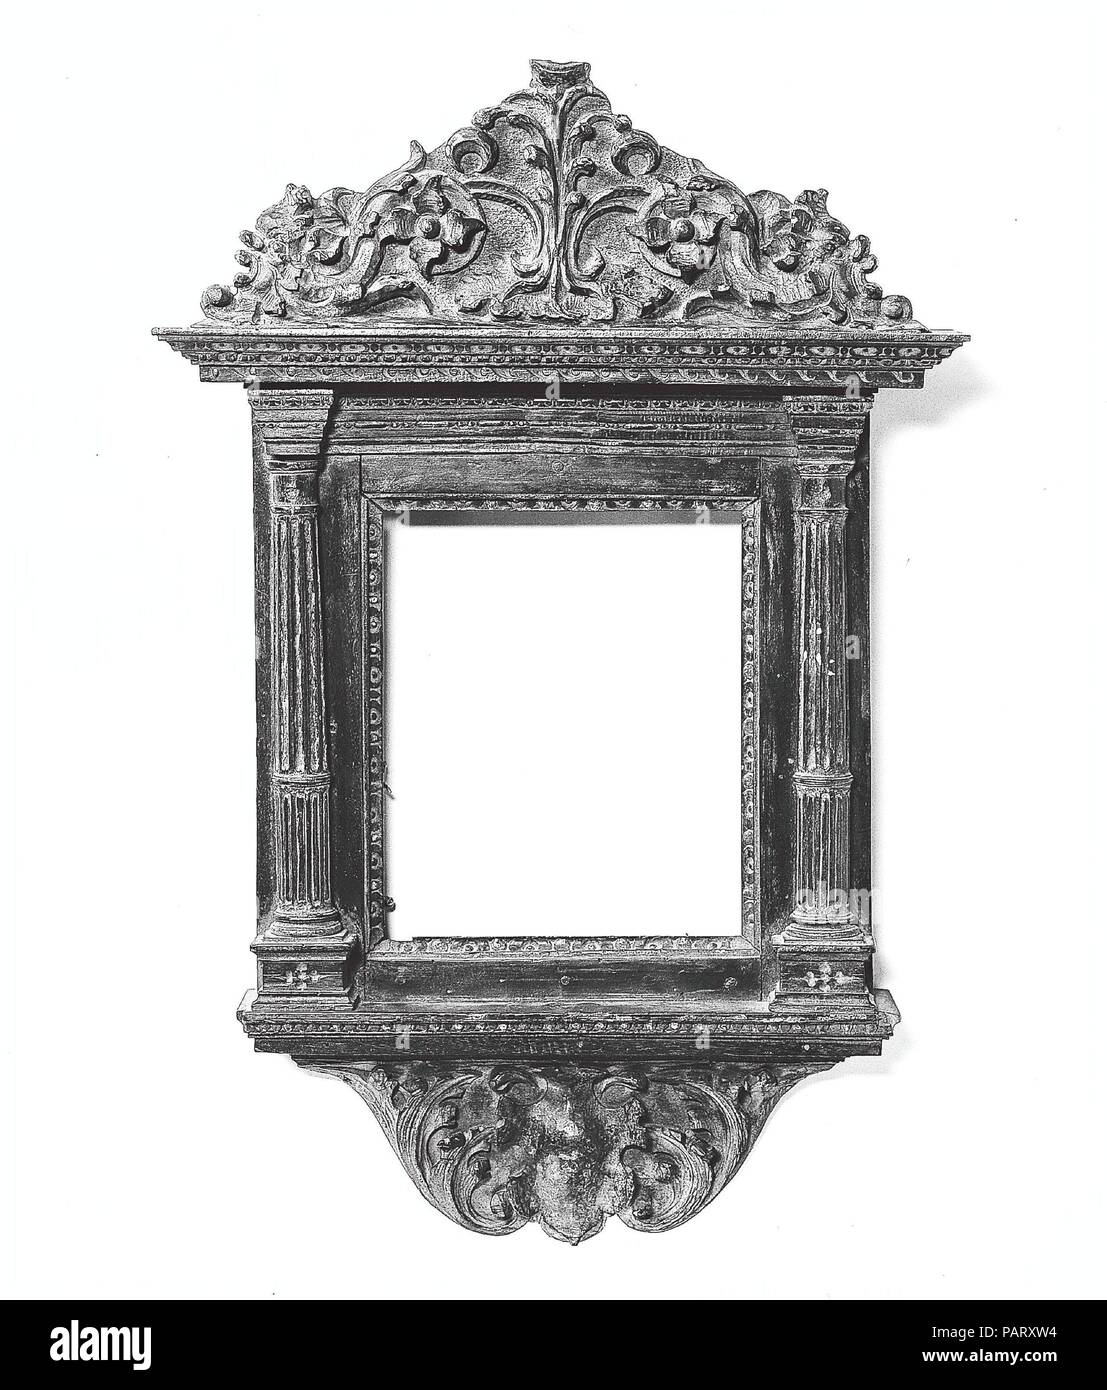 Tabernacle frame. Culture: Italian, Tuscany. Dimensions: 65.2 x 42.2, 23.3 x 19.2, 25 x 20.5 cm.. Date: ca. 1860, style 16th century. Museum: Metropolitan Museum of Art, New York, USA. Stock Photo